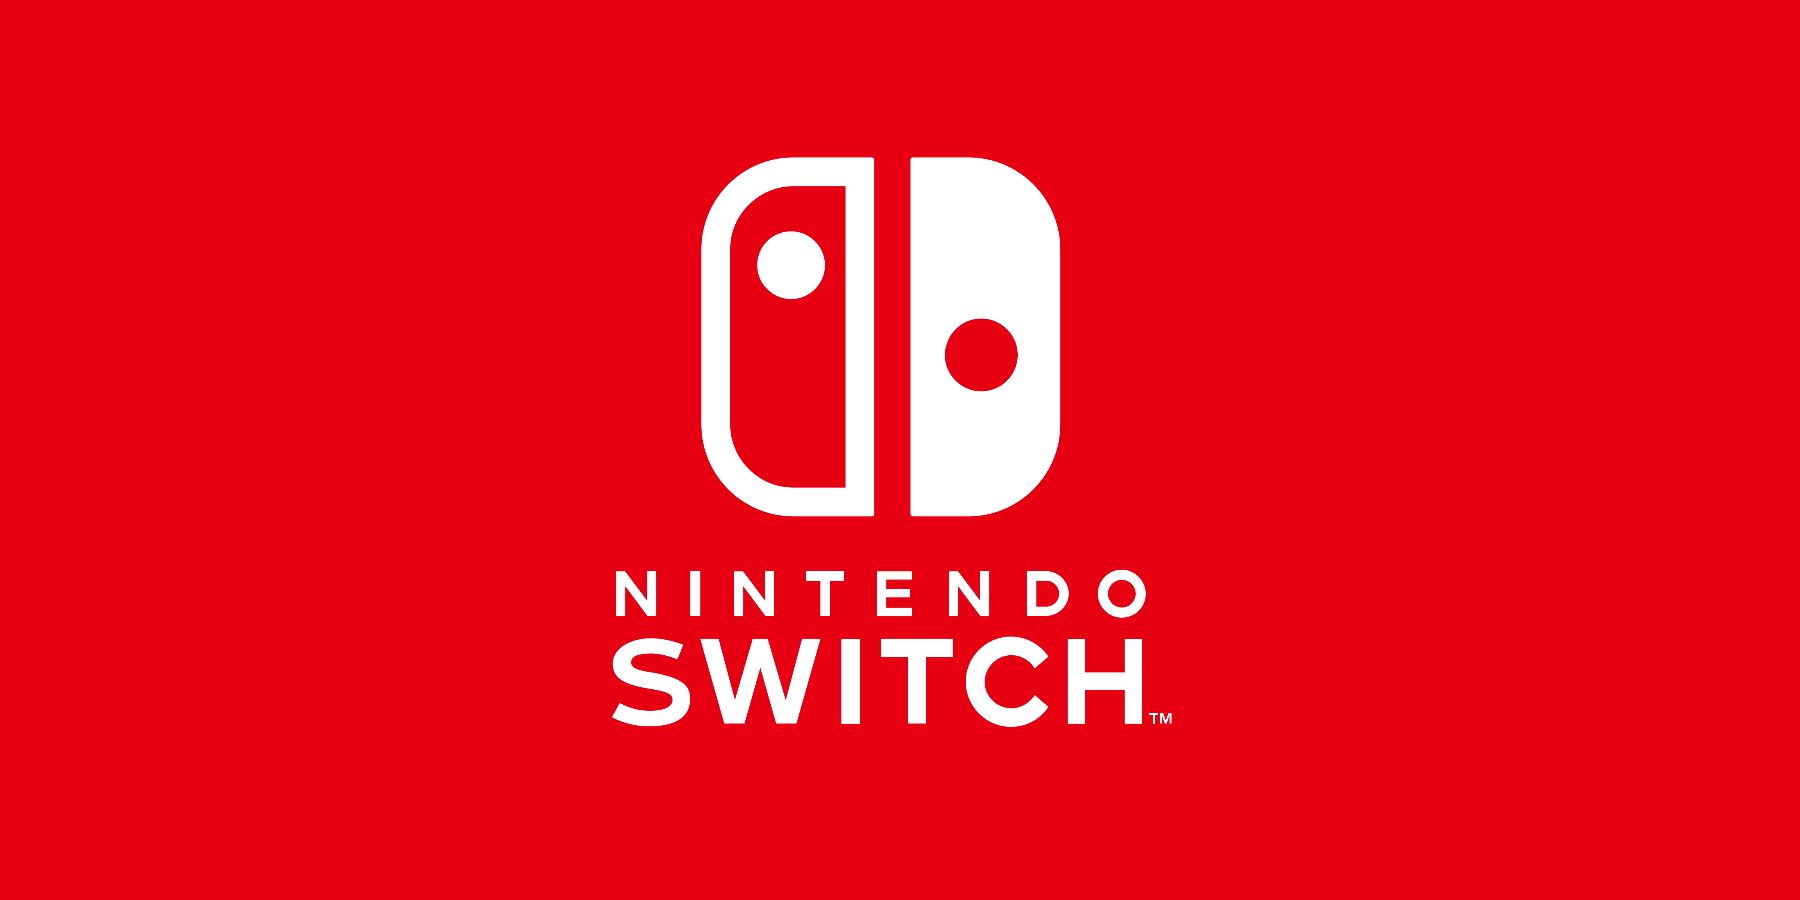 The logo for the Nintendo Switch set against a Nintendo red background.